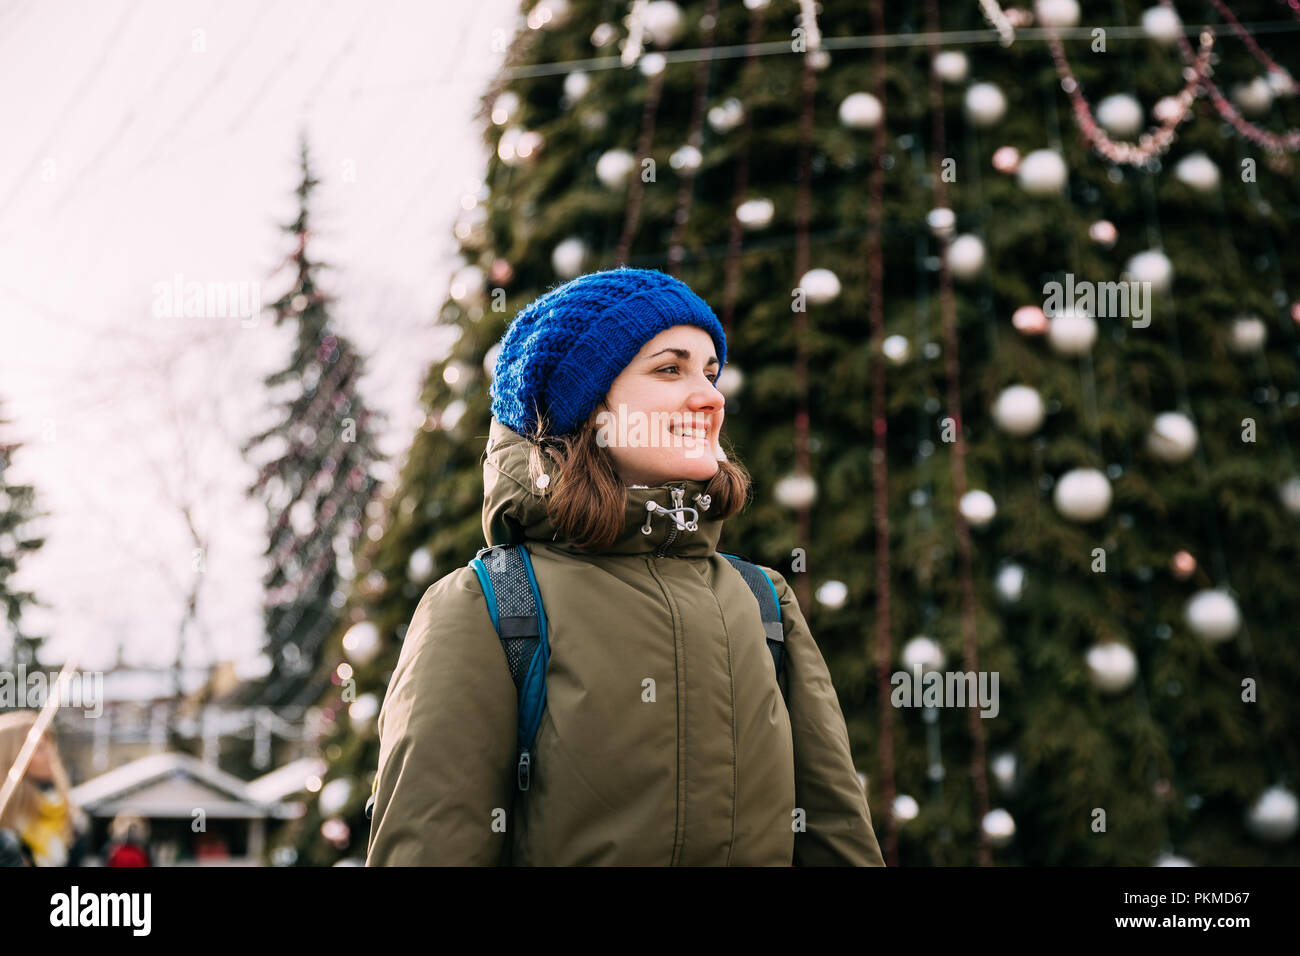 Vilnius, Lithuania. Young Beautiful Pretty Caucasian Girl Woman Dressed In Green Jacket And Blue Hat Having Fun On Background Christmas Tree. Stock Photo